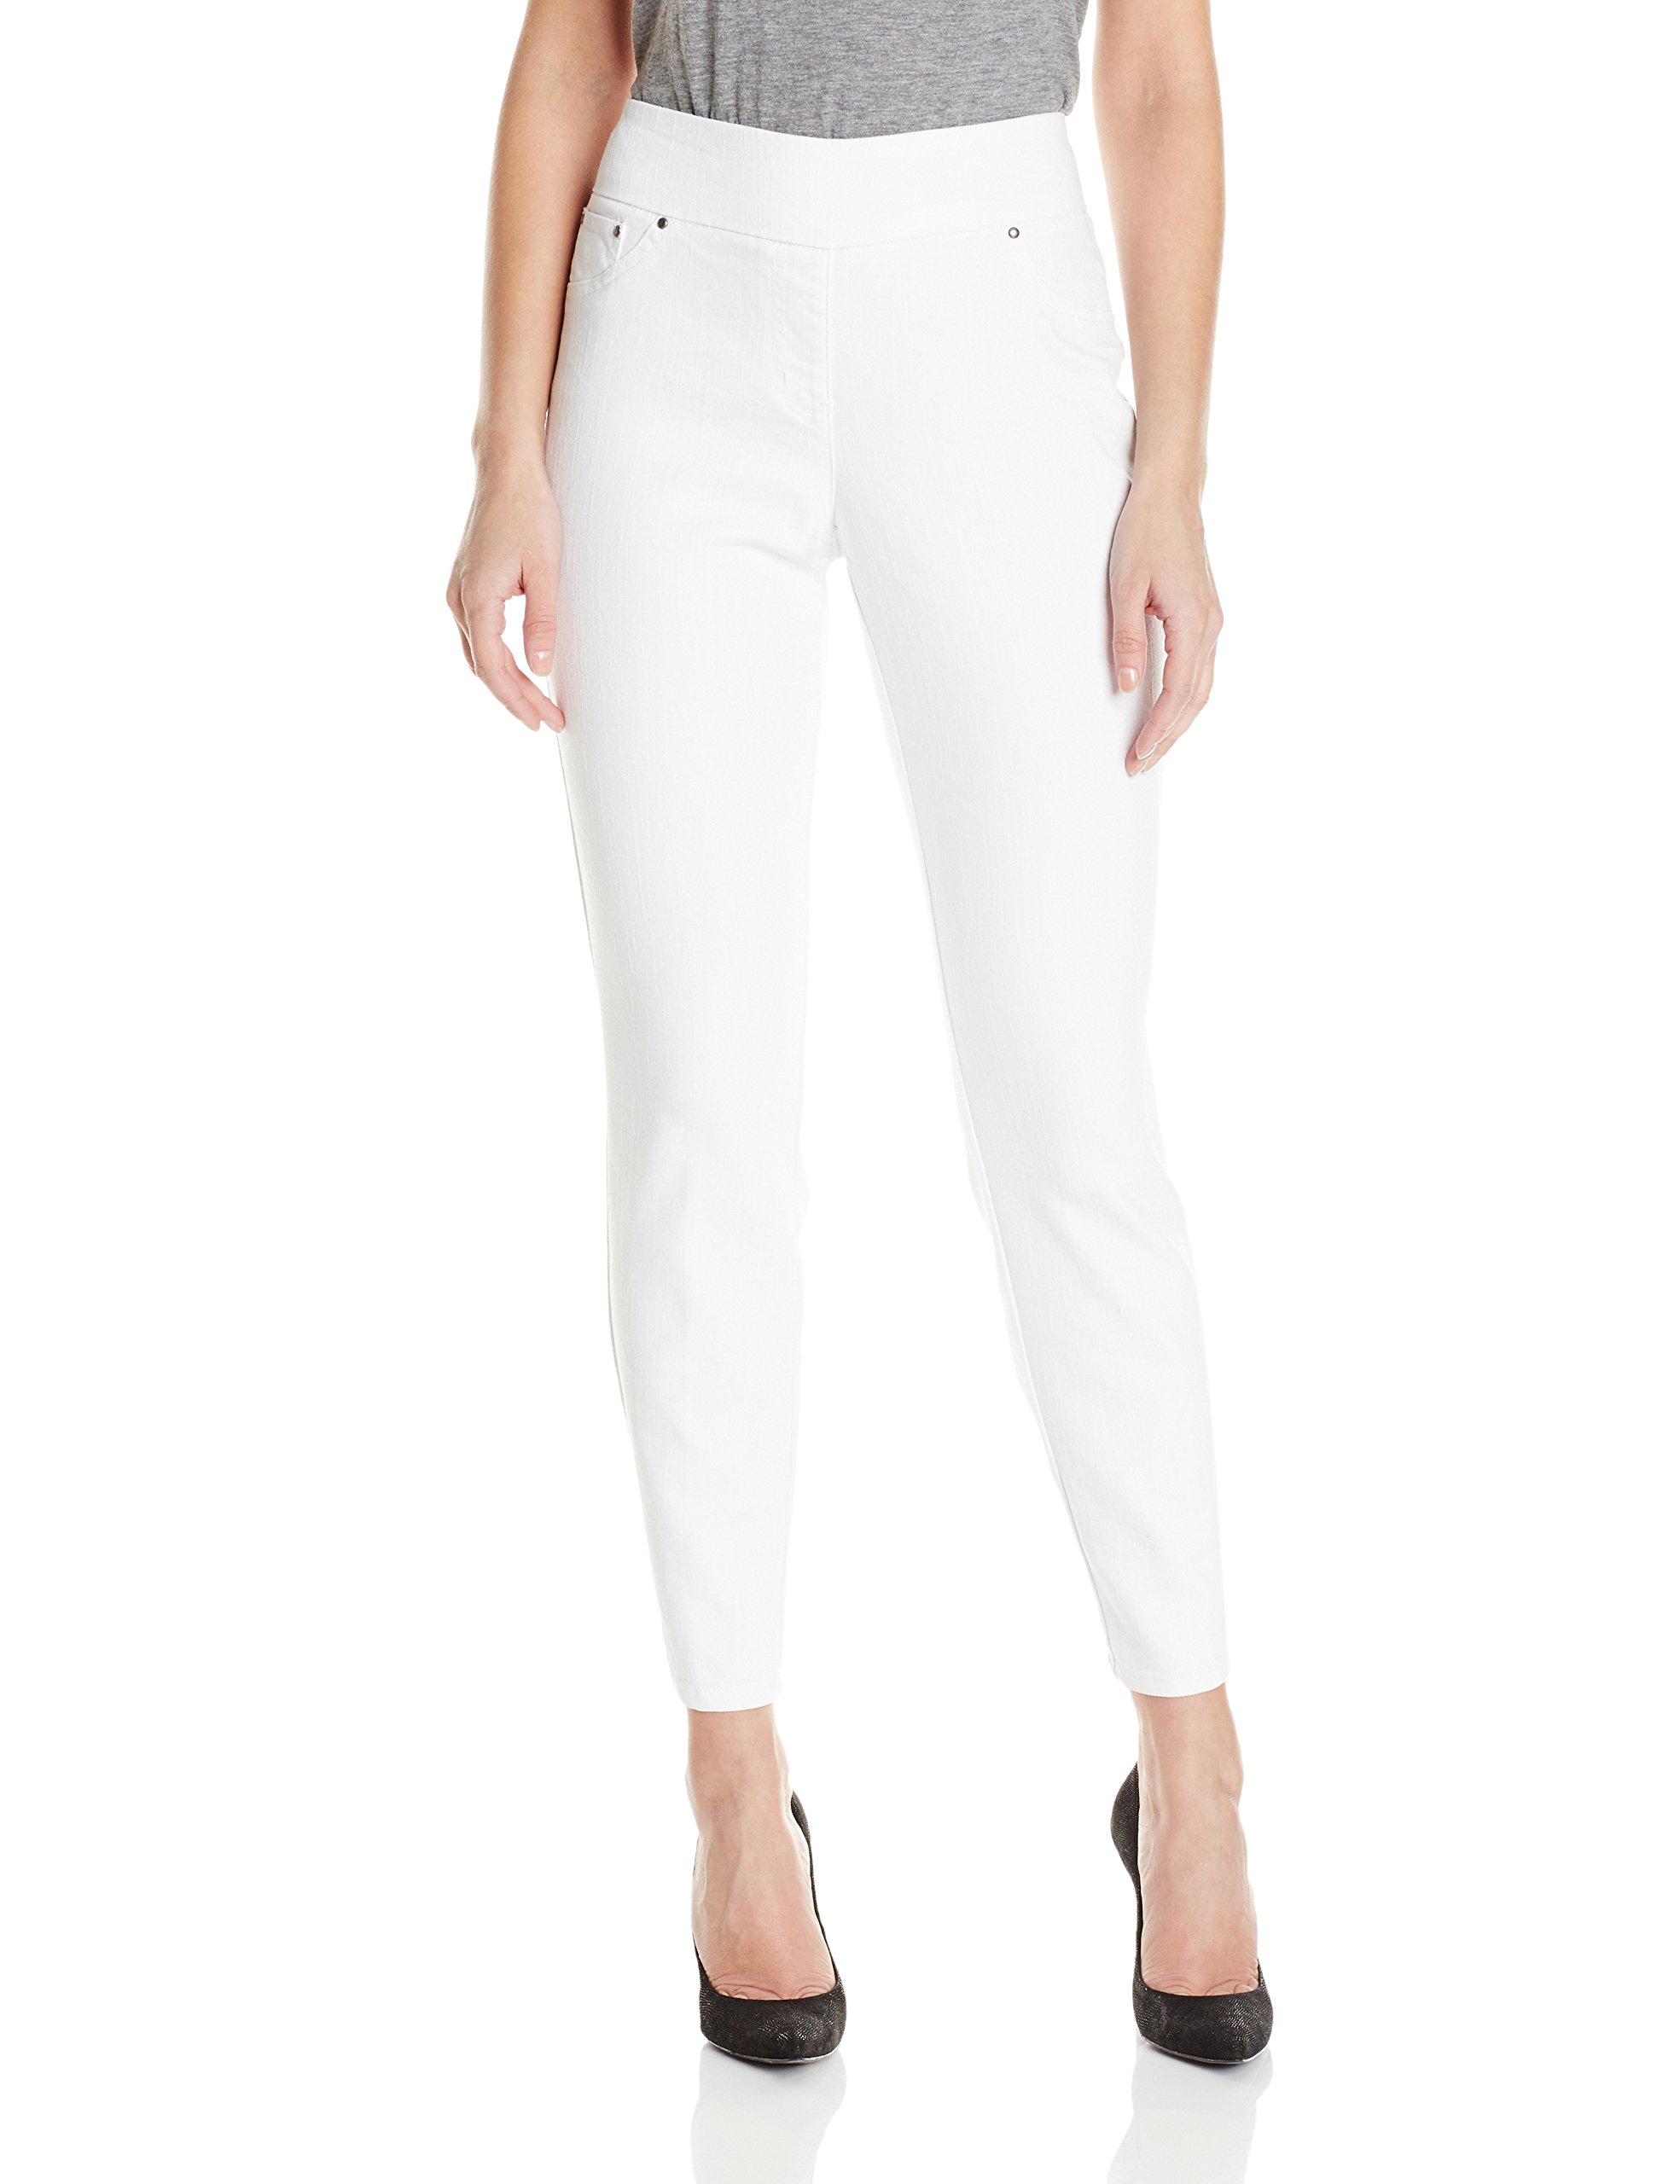 women's pull on stretch jeans